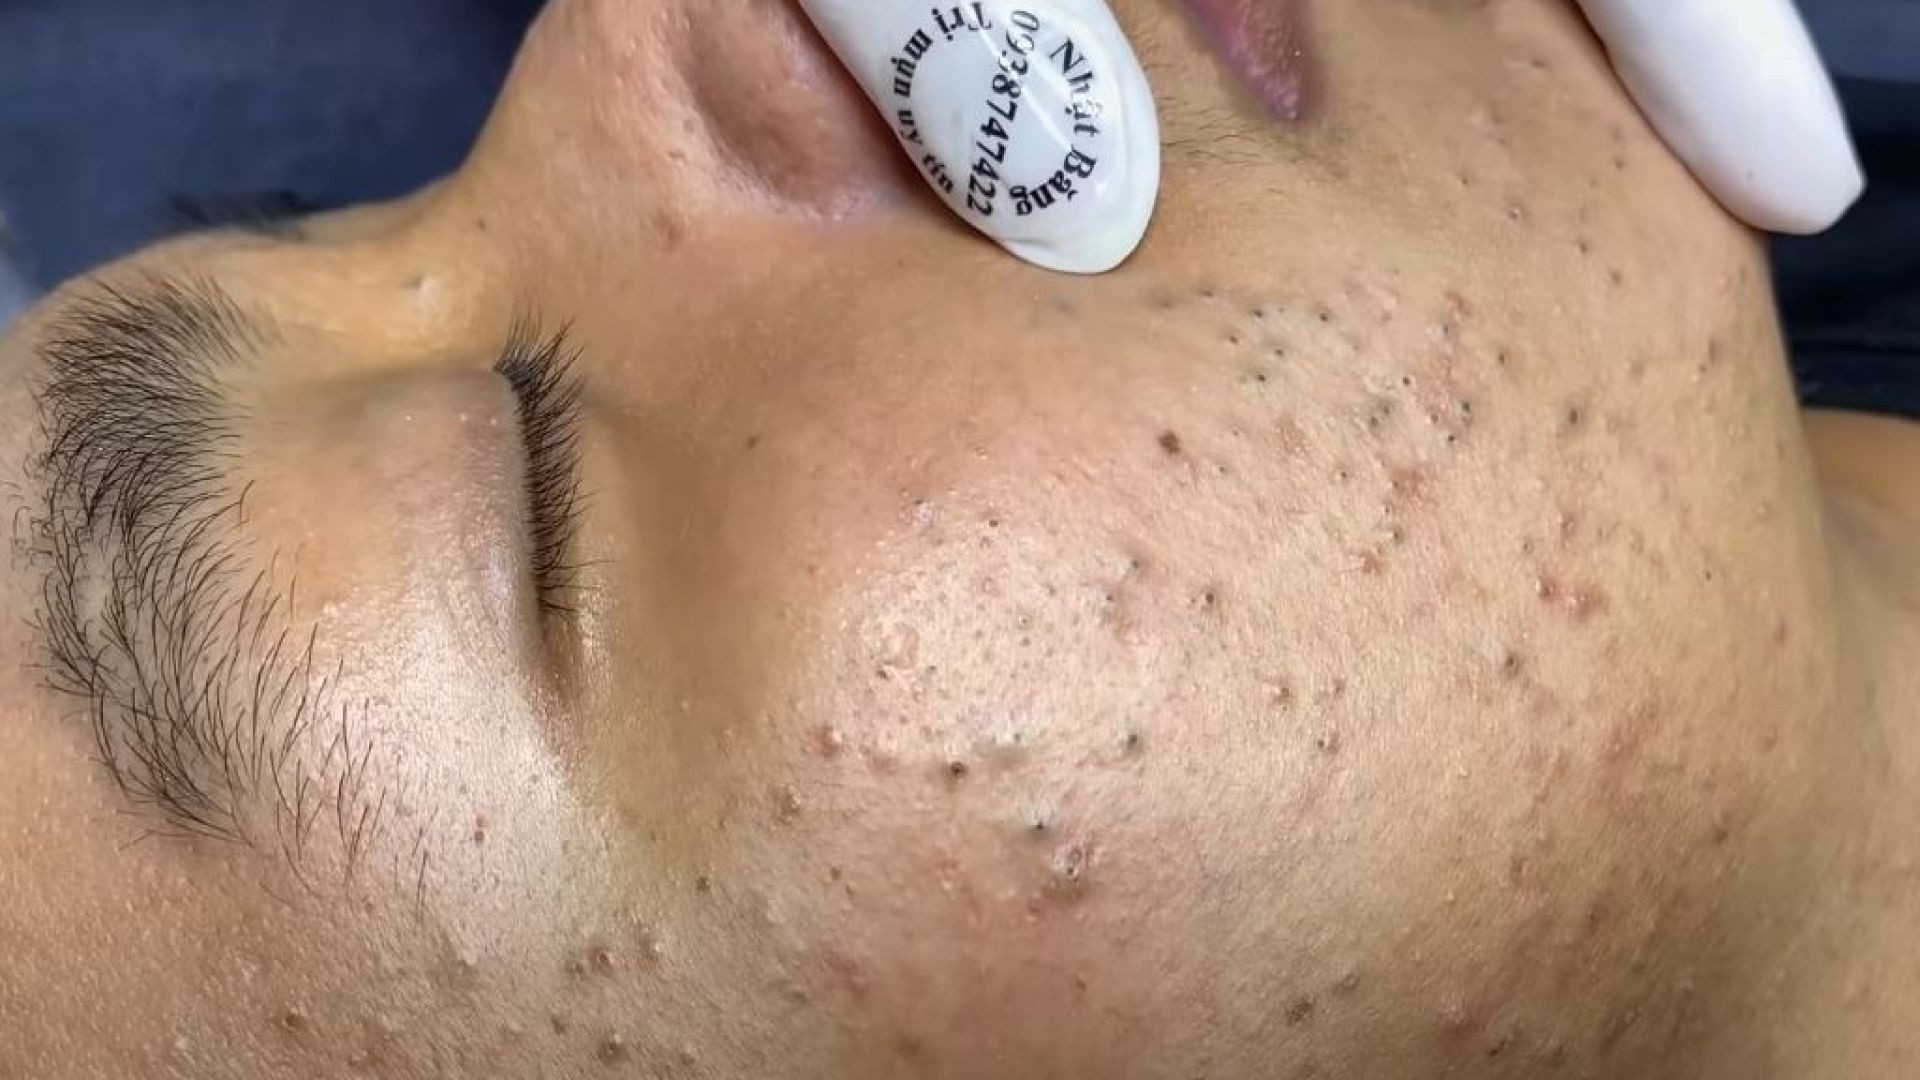 See These Giant Blackheads on the Face